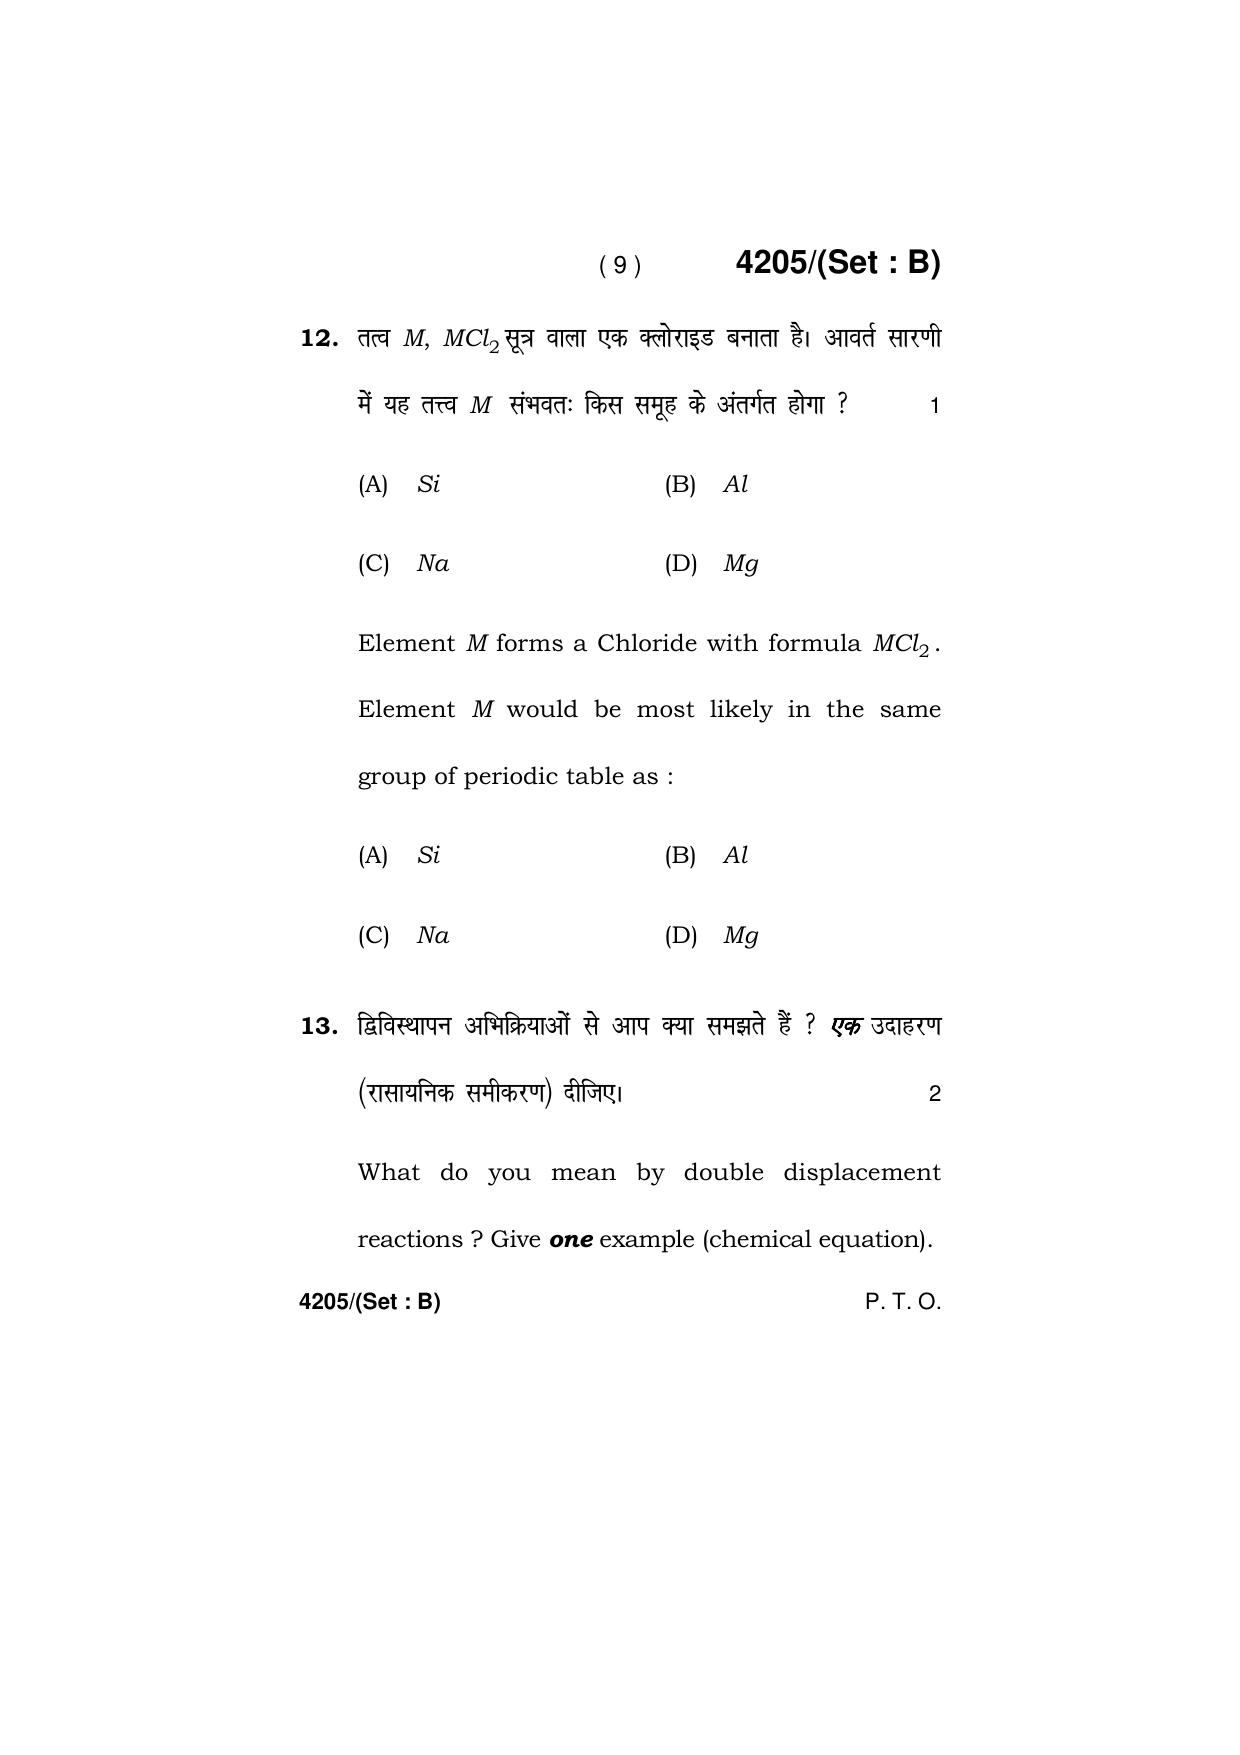 Haryana Board HBSE Class 10 Science (All Set) 2019 Question Paper - Page 25